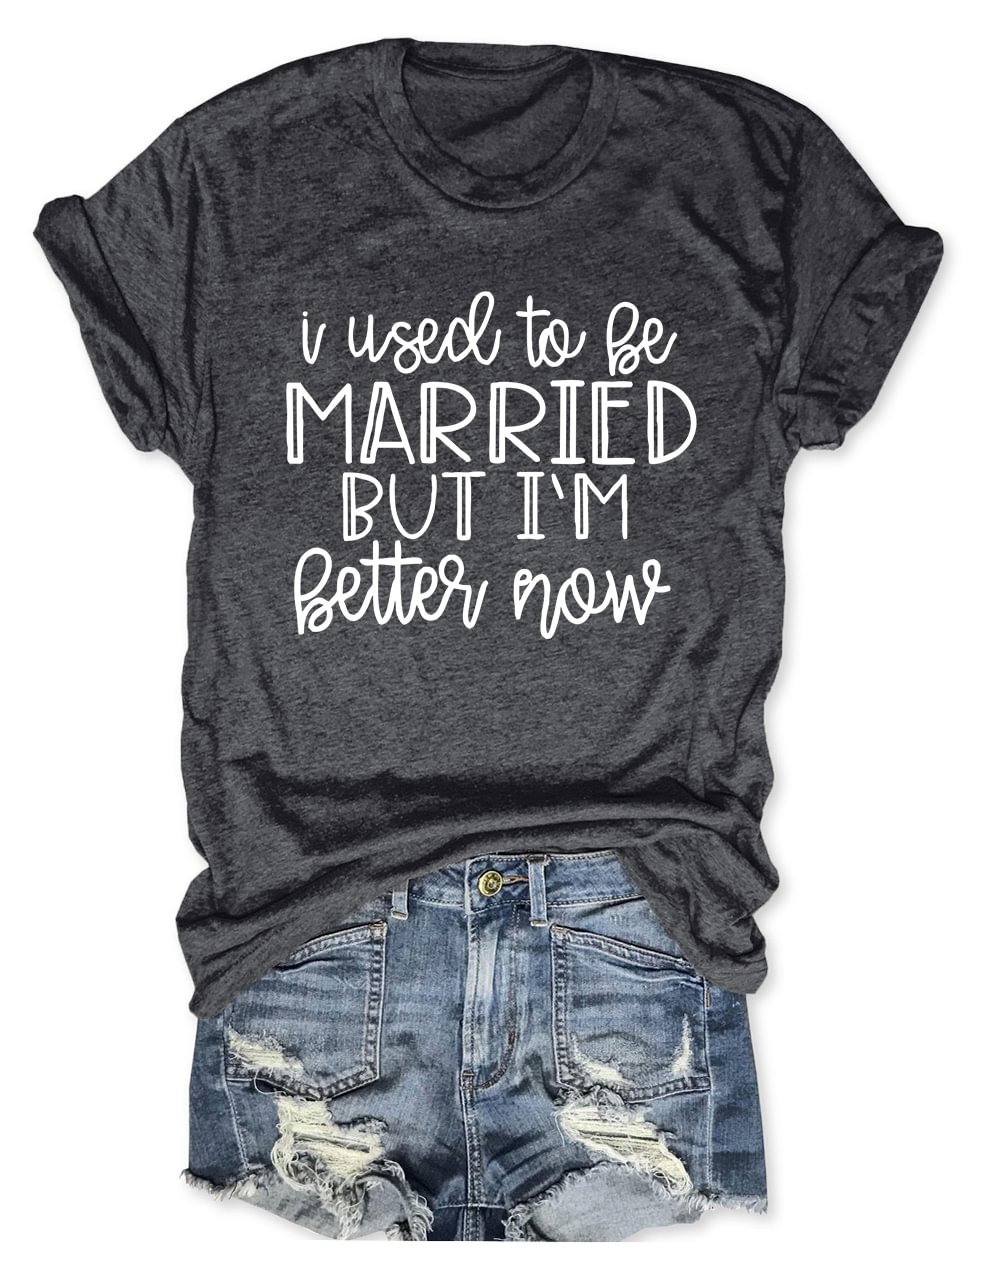 I Used To Be Married But I'm Better Now T-Shirt